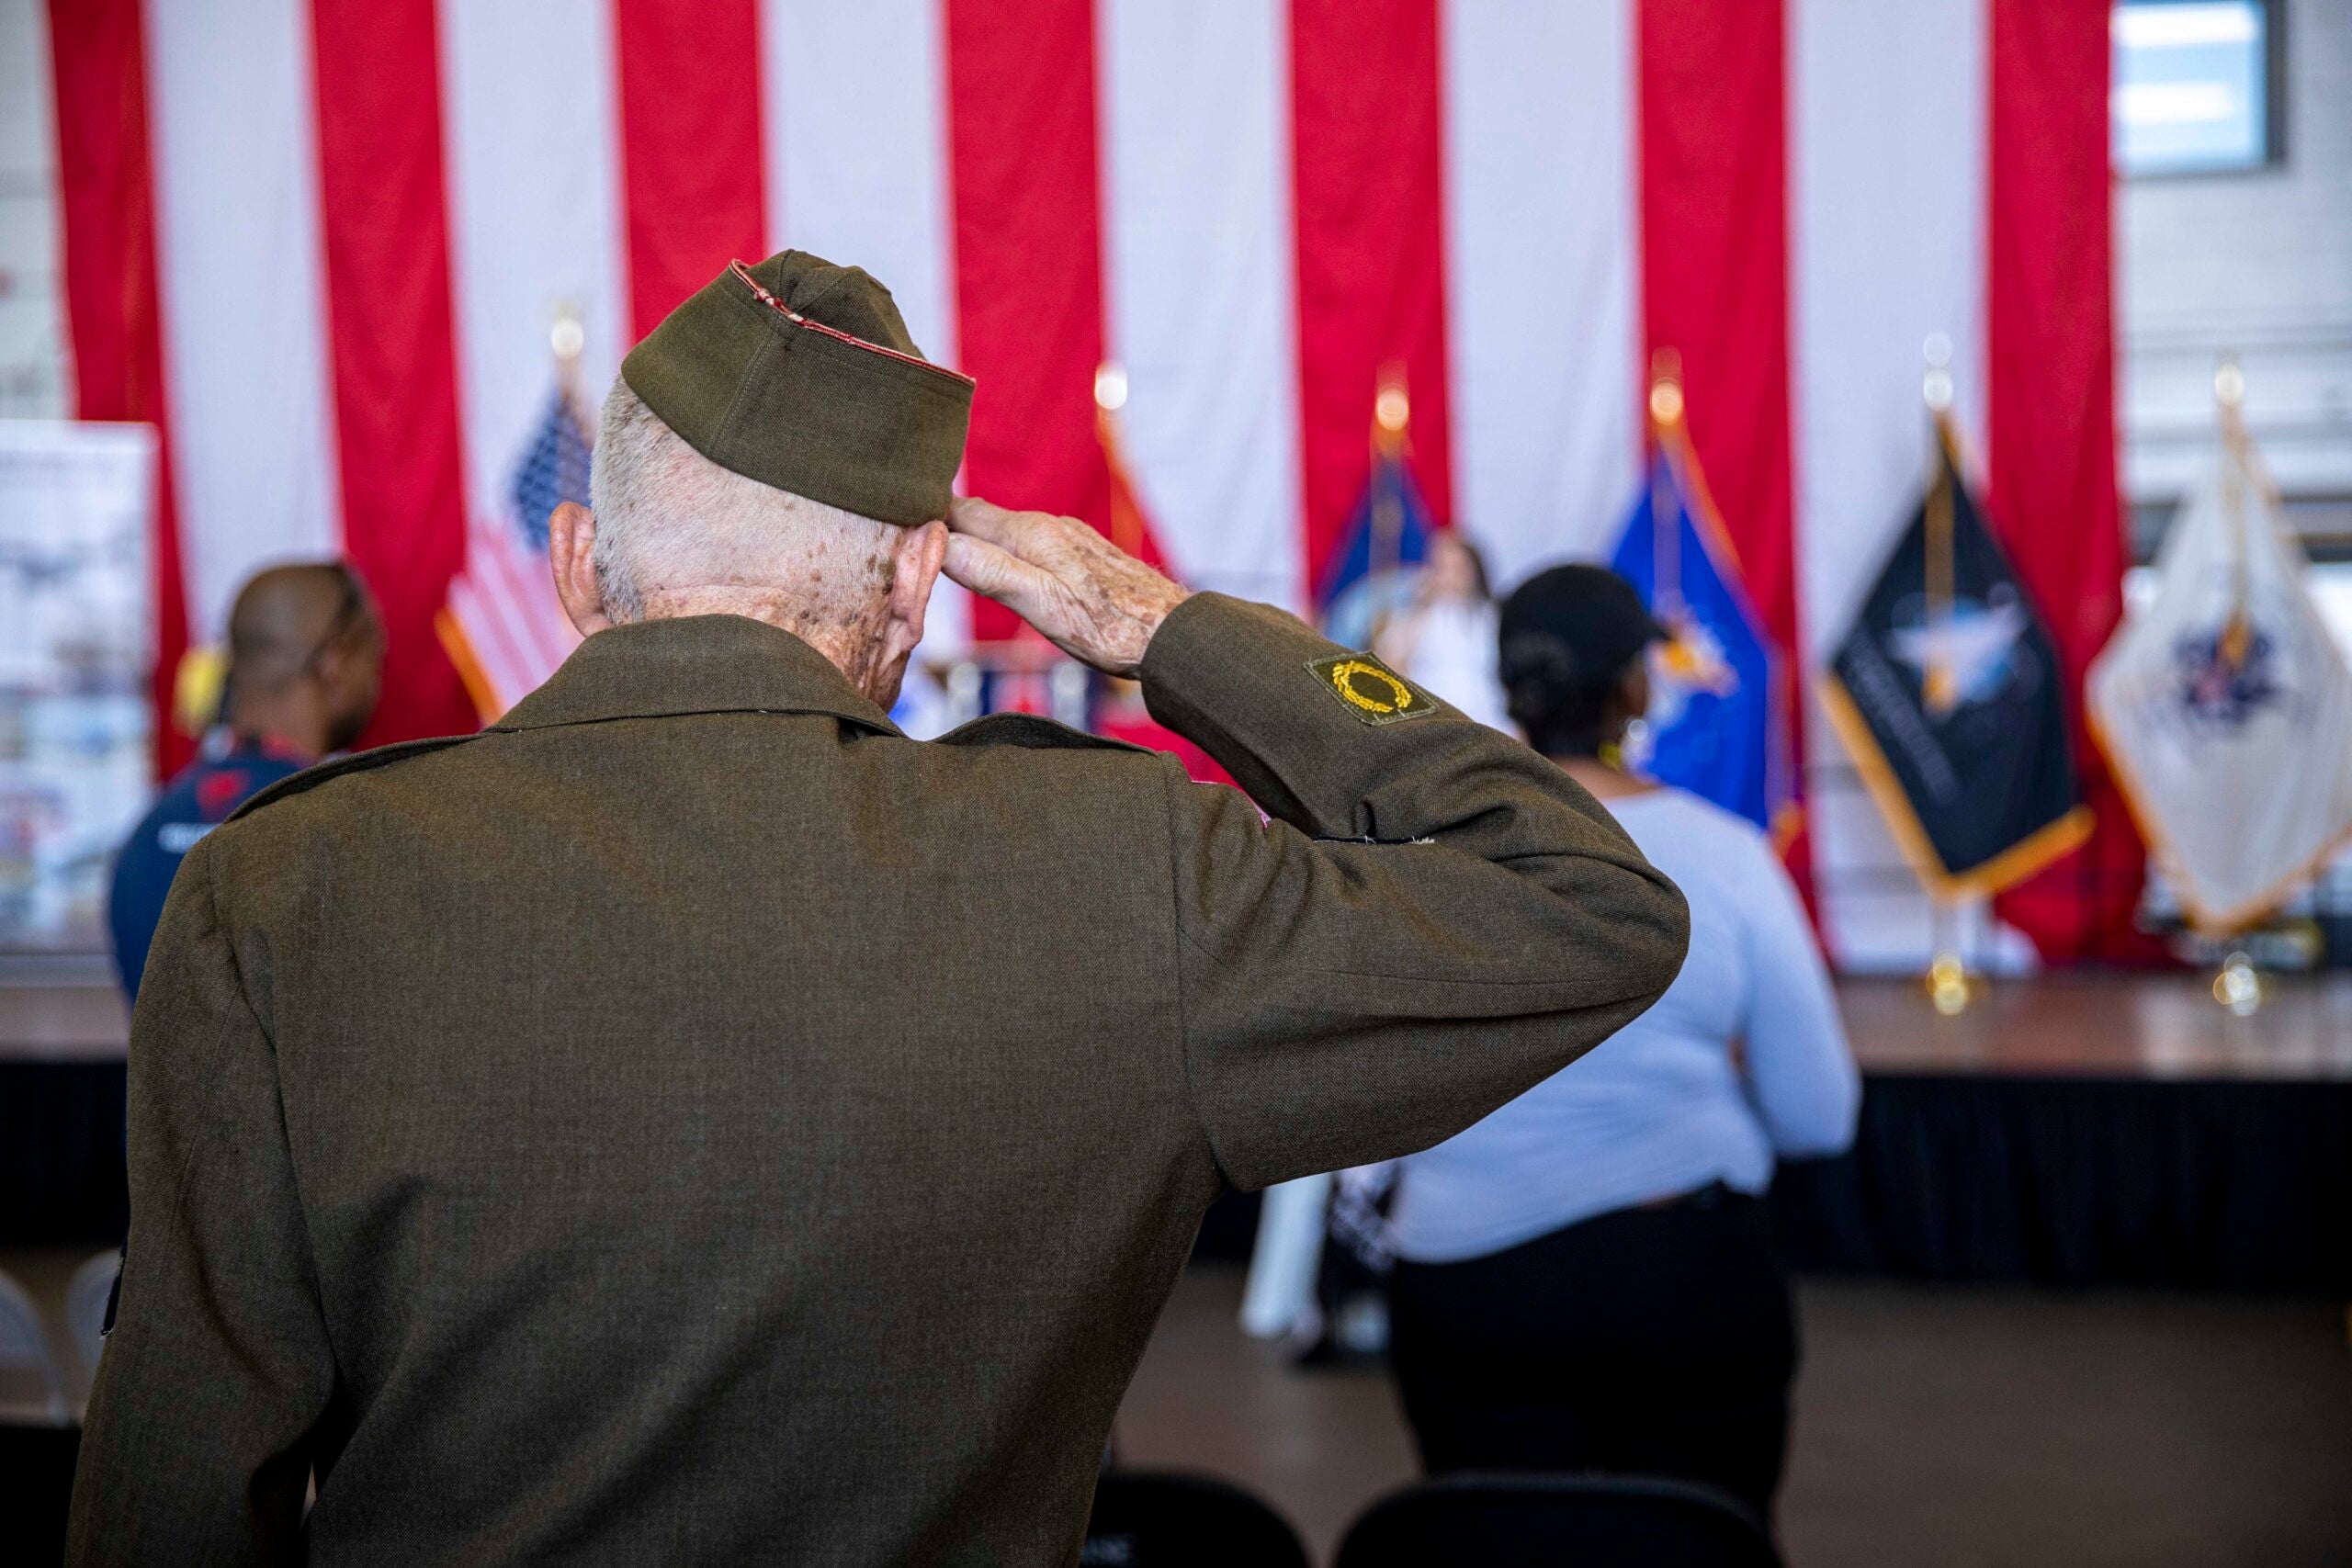 U.S Army World War II Veteran Andre Chappaz, who served from 1943-1946, salutes the flag during the national anthem in Hartsfield-Jackson Atlanta International Airport, Georgia, Nov. 3, 2022. The Marines with the 22nd MEU are participating in the Delta Airlines Veterans Day air show to showcase and highlight military air power. (U.S. Marine Corps photo by Cpl. Yvonna Guyette)